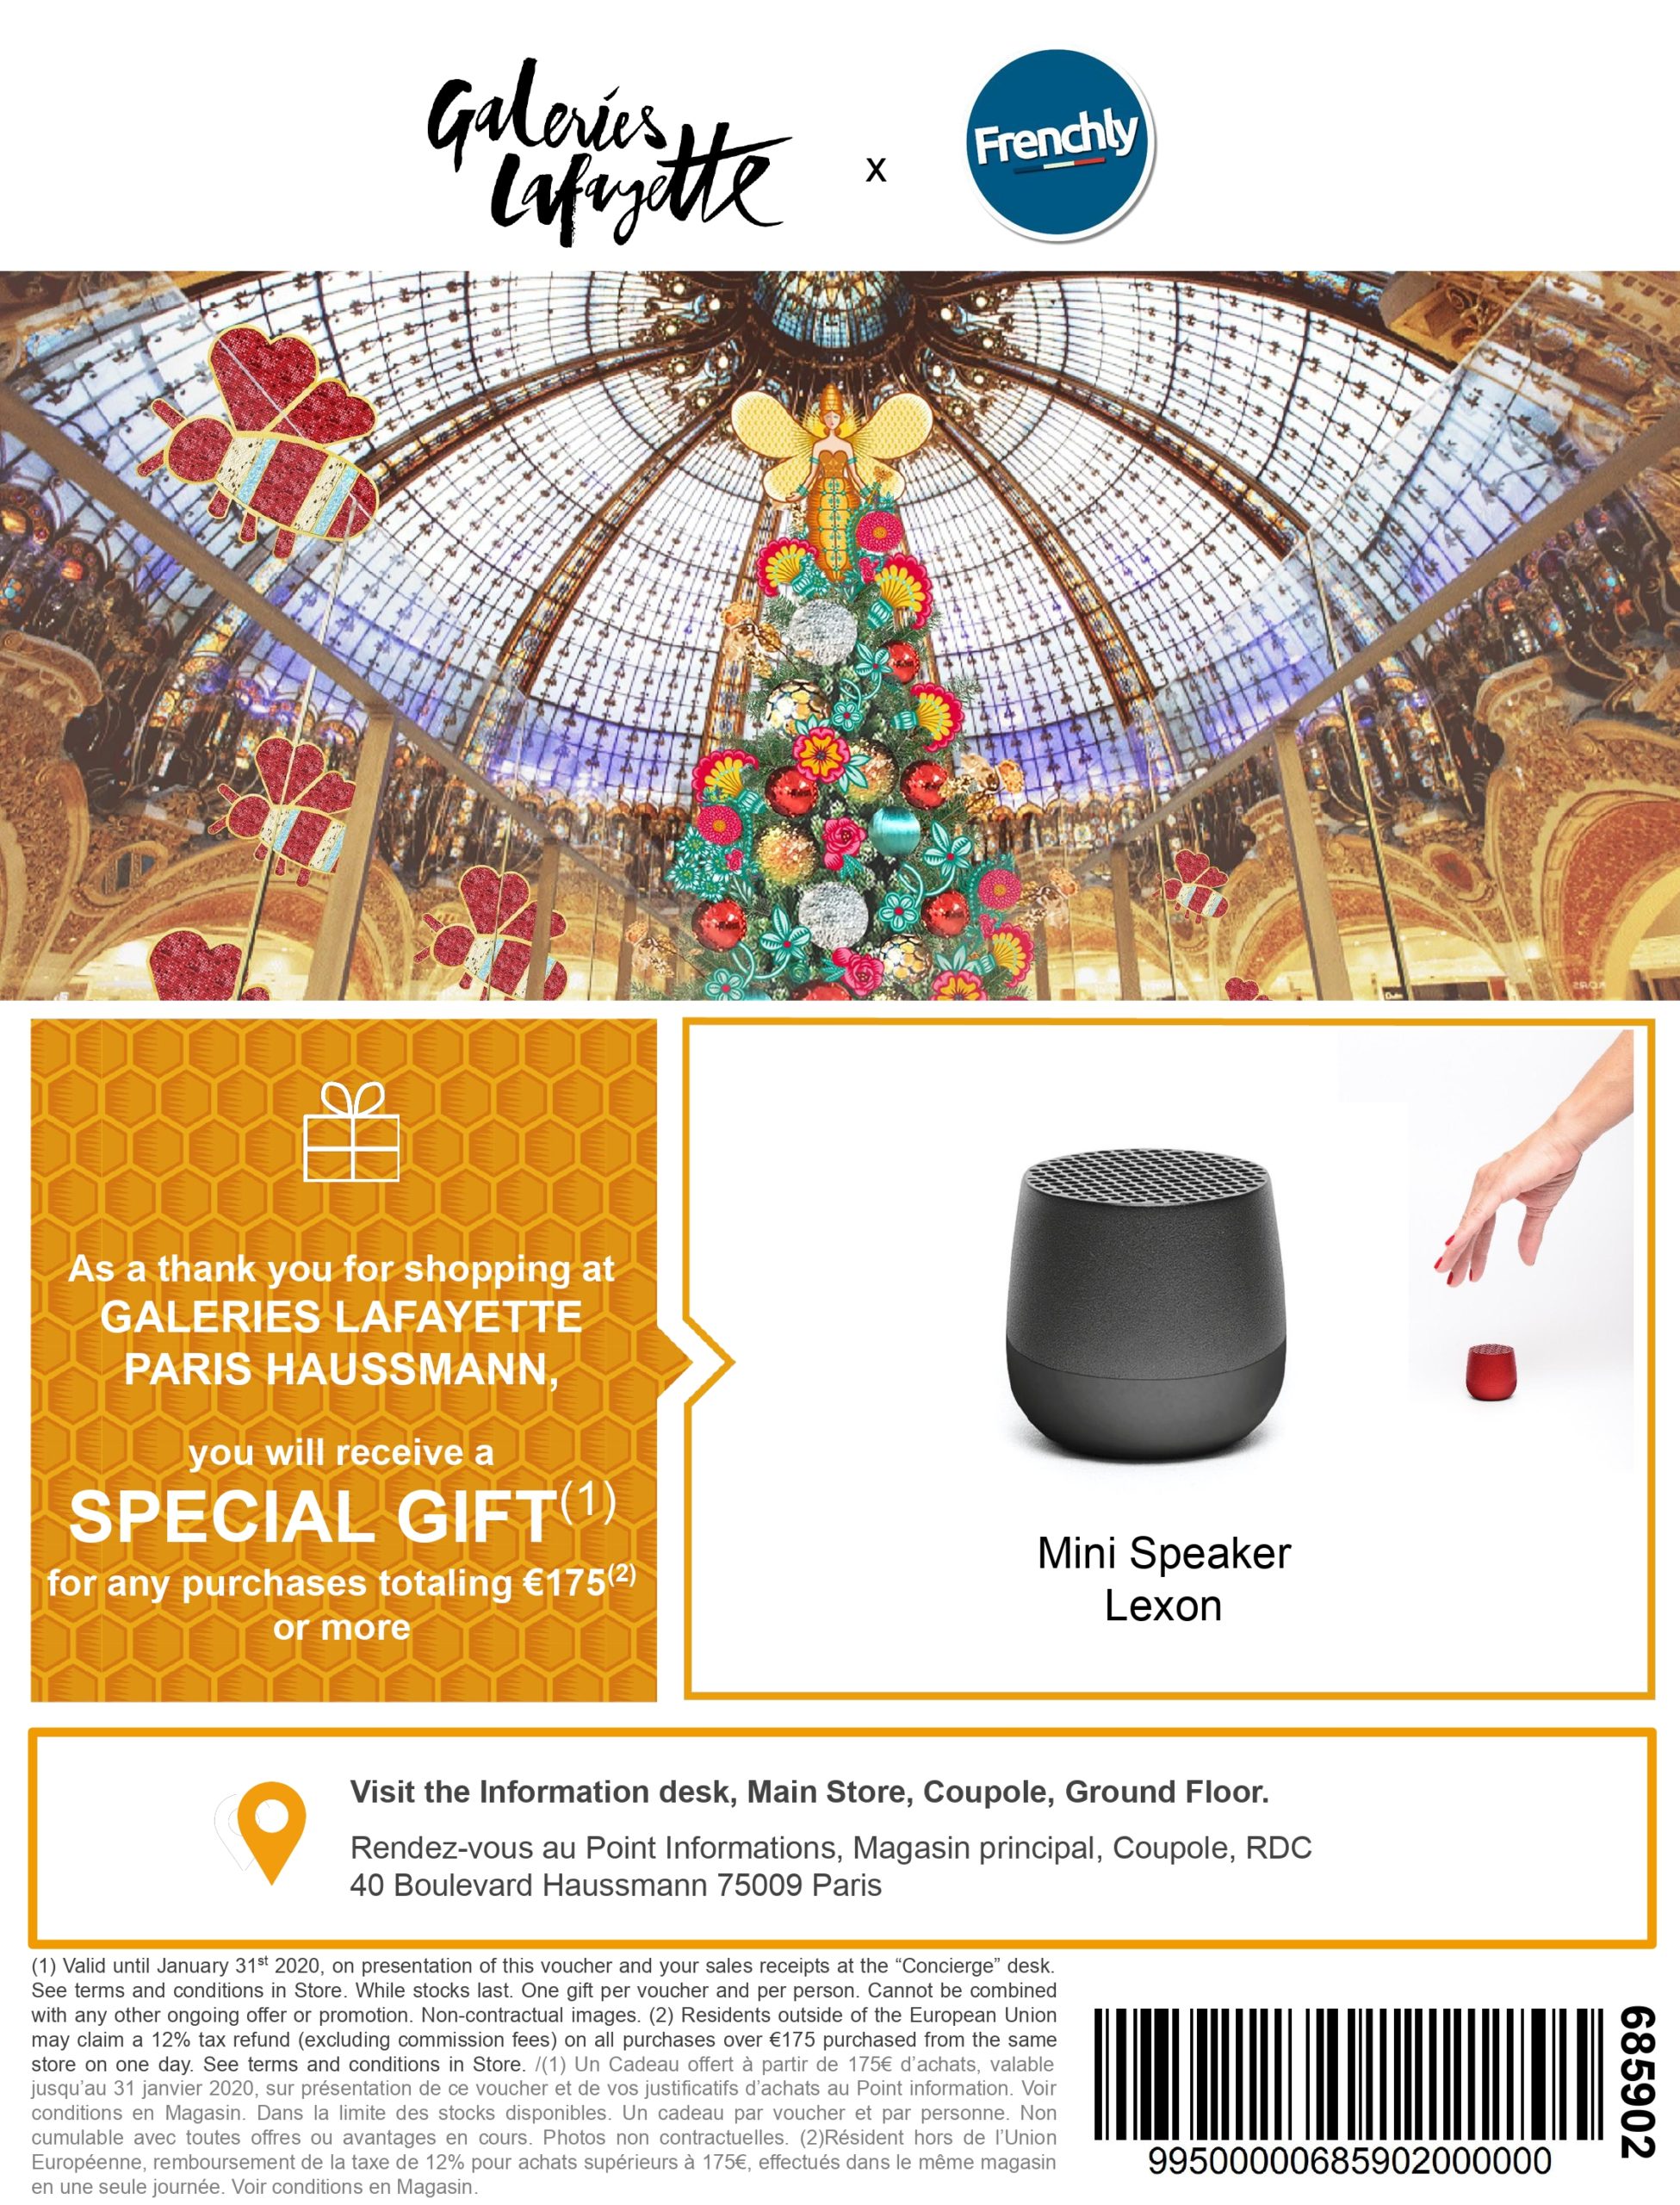 What to do in Paris this week-end? Free hot chocolateby Marcolini,  Photocall with the Father Christmas and free beauty worksshop at the Galeries  Lafayette Champs-Élysées